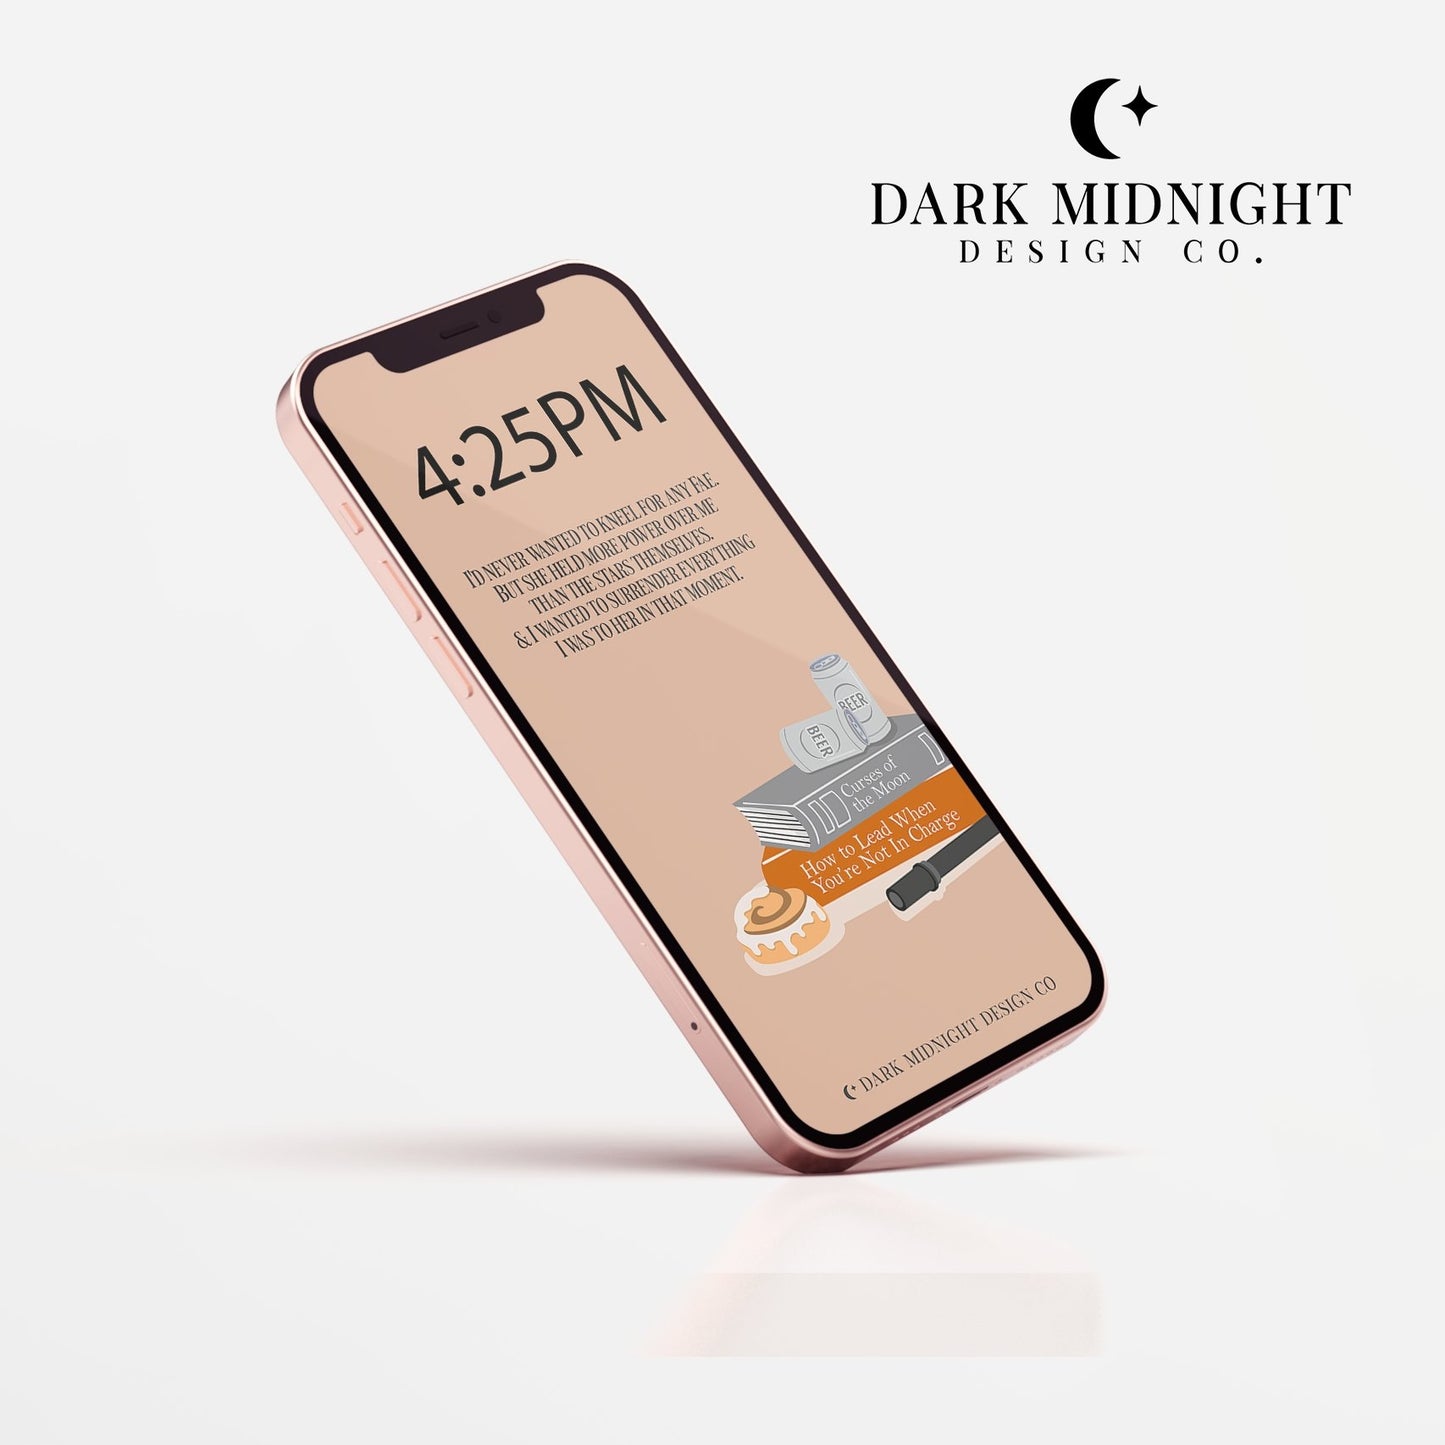 Character Anthology Phone Wallpaper - Mason Cain - Officially Licensed Darkmore Penitentiary Phone Wallpaper - Dark Midnight Design Co